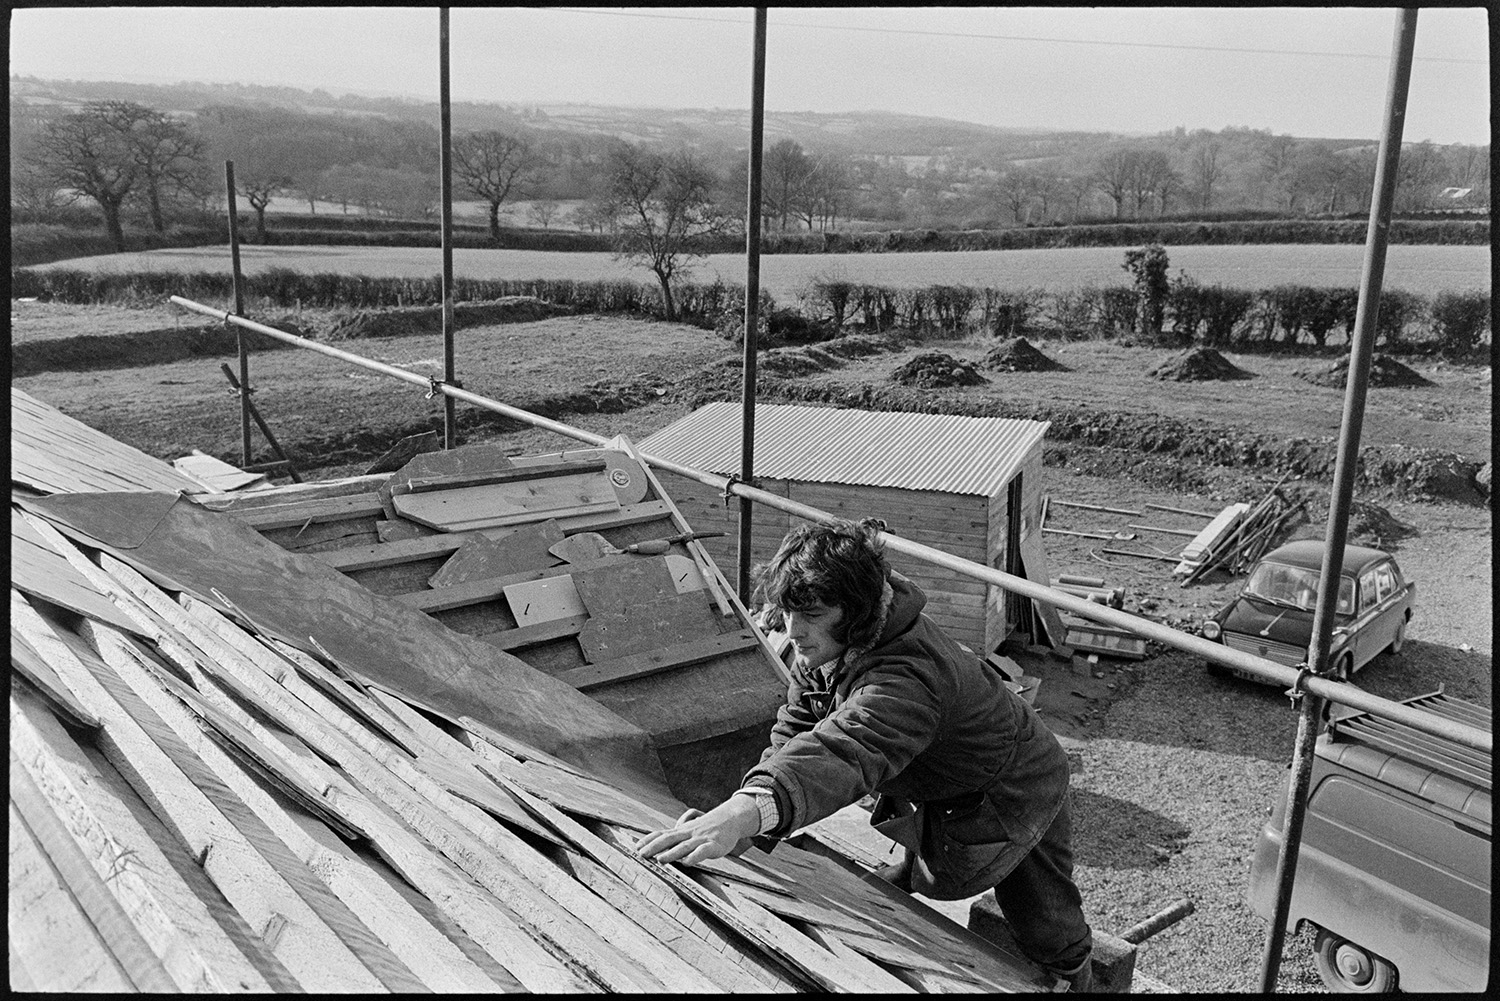 Man slating roof. <br />
[A man nailing slates to a roof at Langlands, Iddesleigh. He is stood on scaffolding. A car, van, wooden shed, fields, hedges and trees can be seen in the background.]